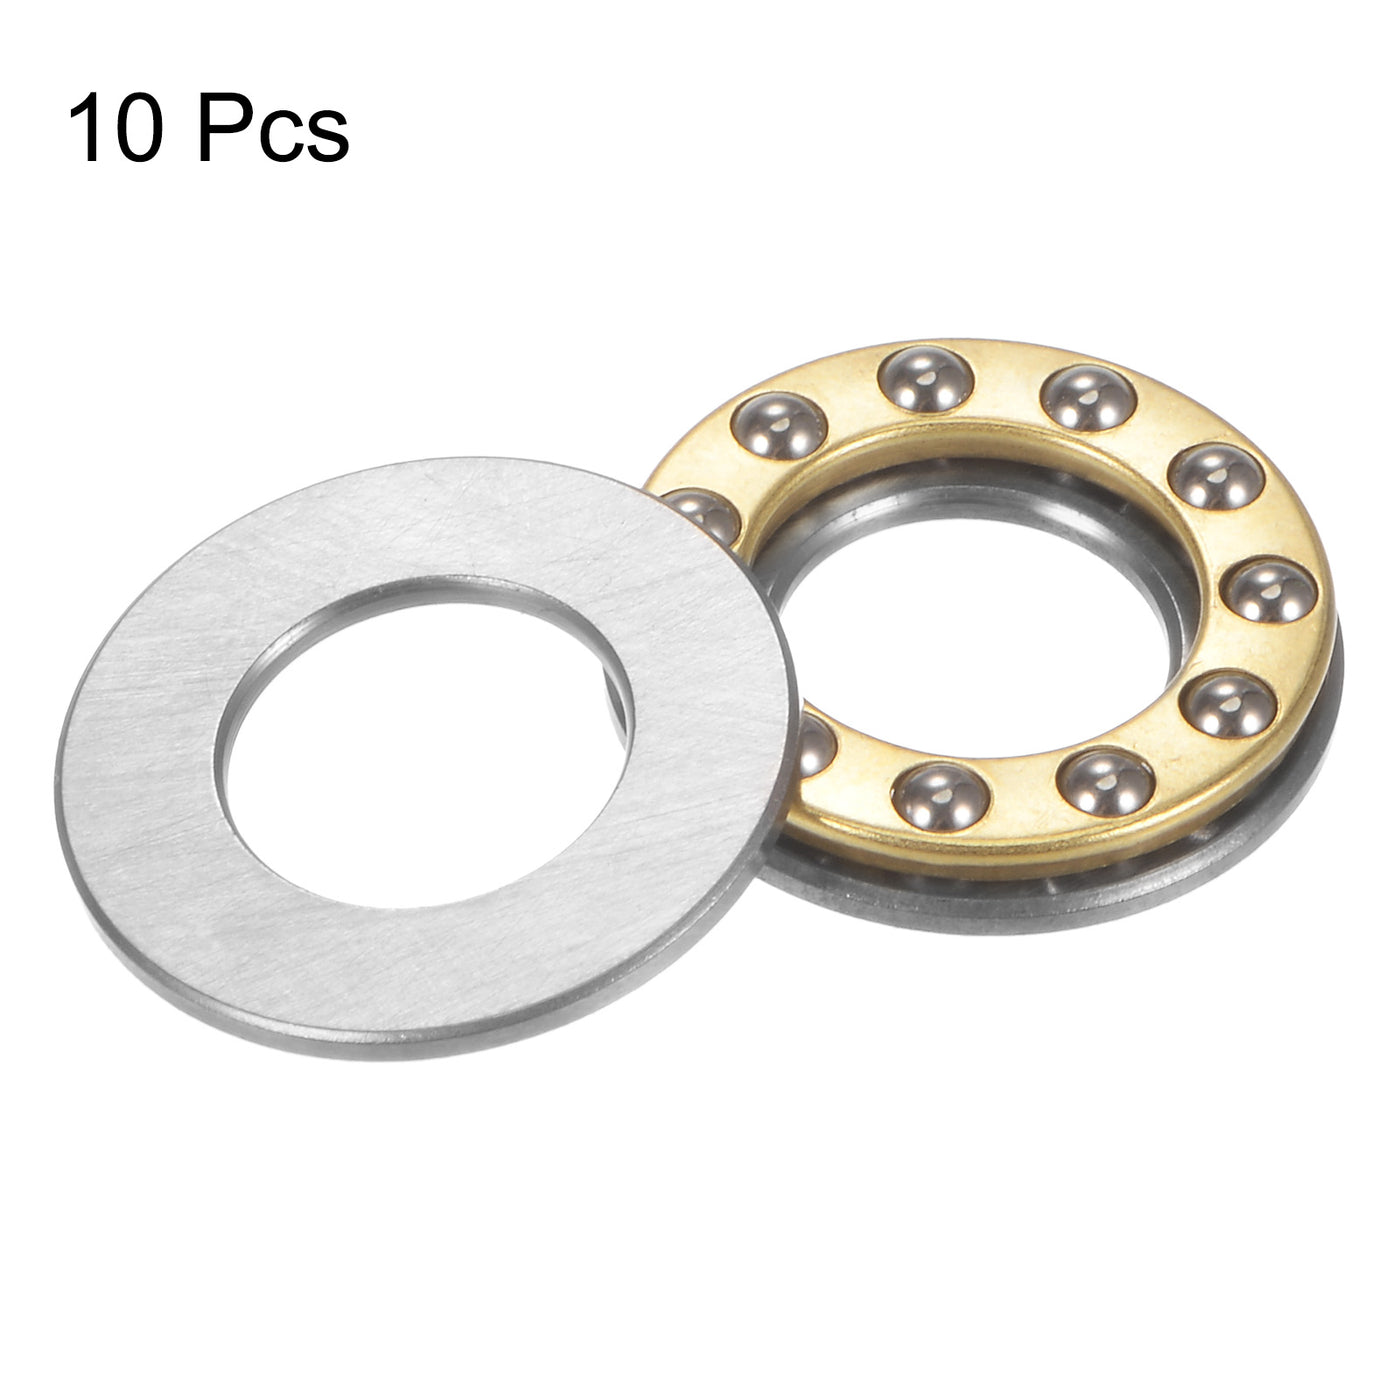 uxcell Uxcell F12-21M Thrust Ball Bearing 11x21x5mm Brass with Washers 10pcs